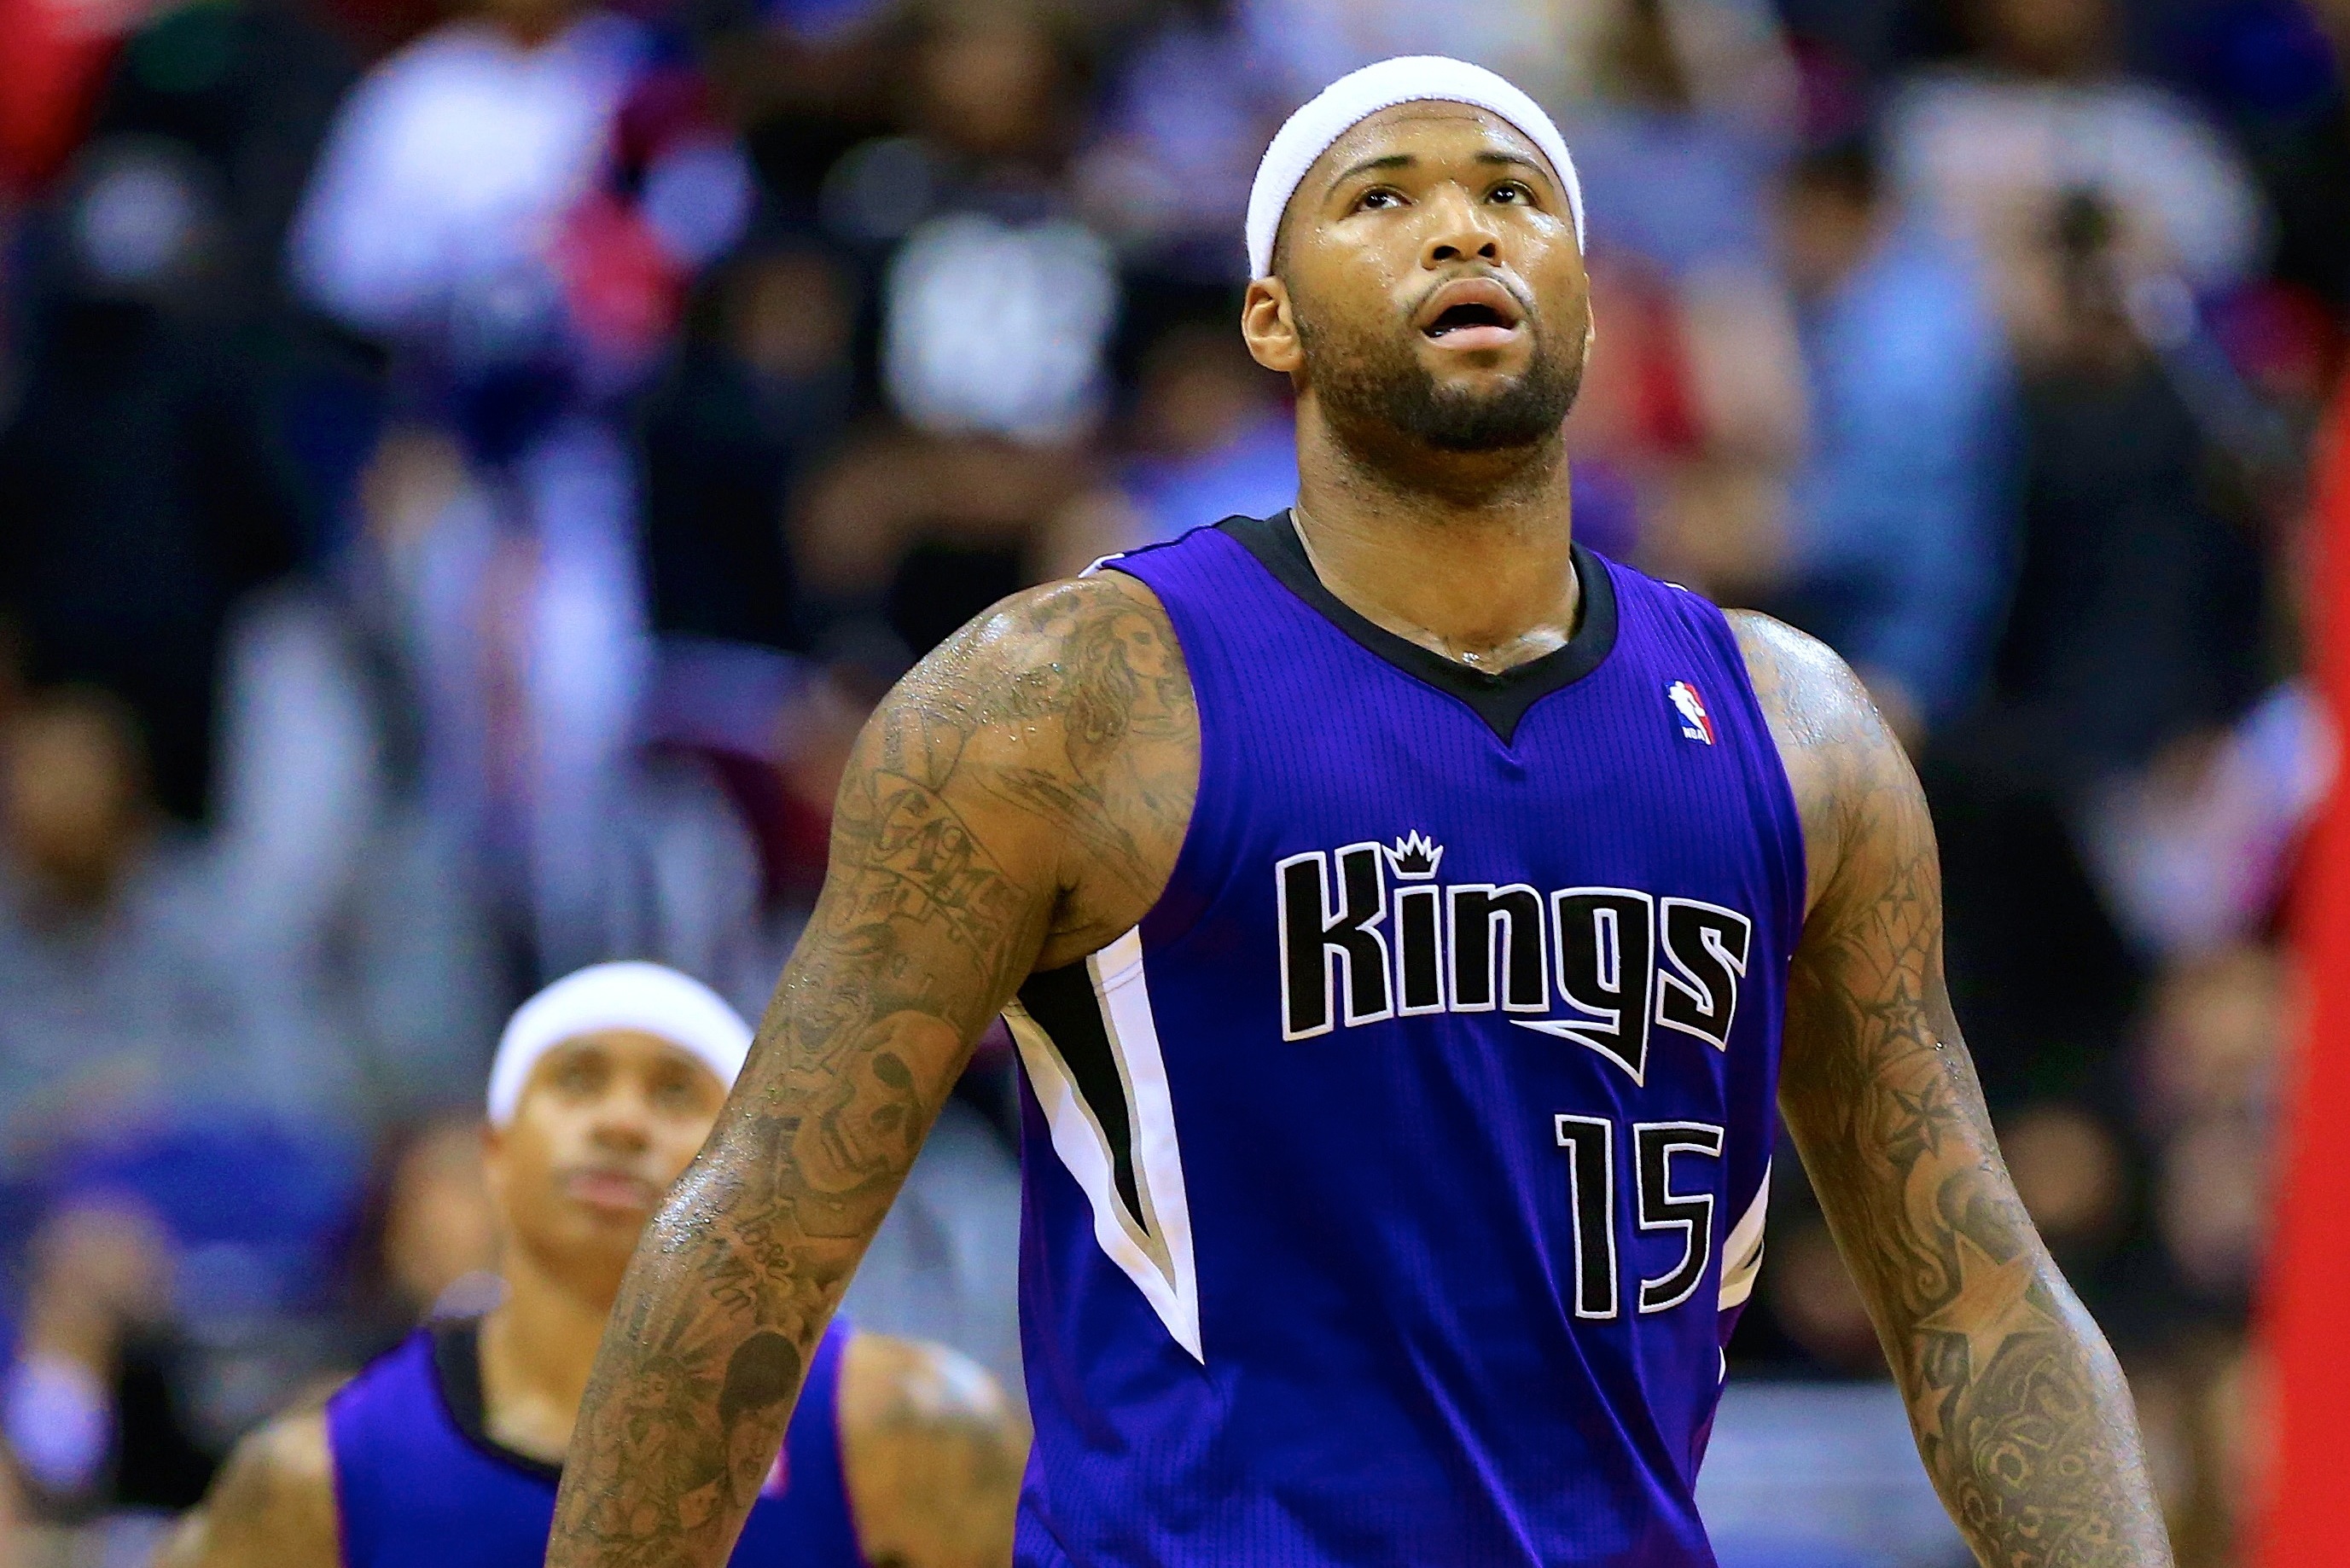 DeMarcus Cousins says his jersey will hang in the rafters when he 'retires  in Sacramento